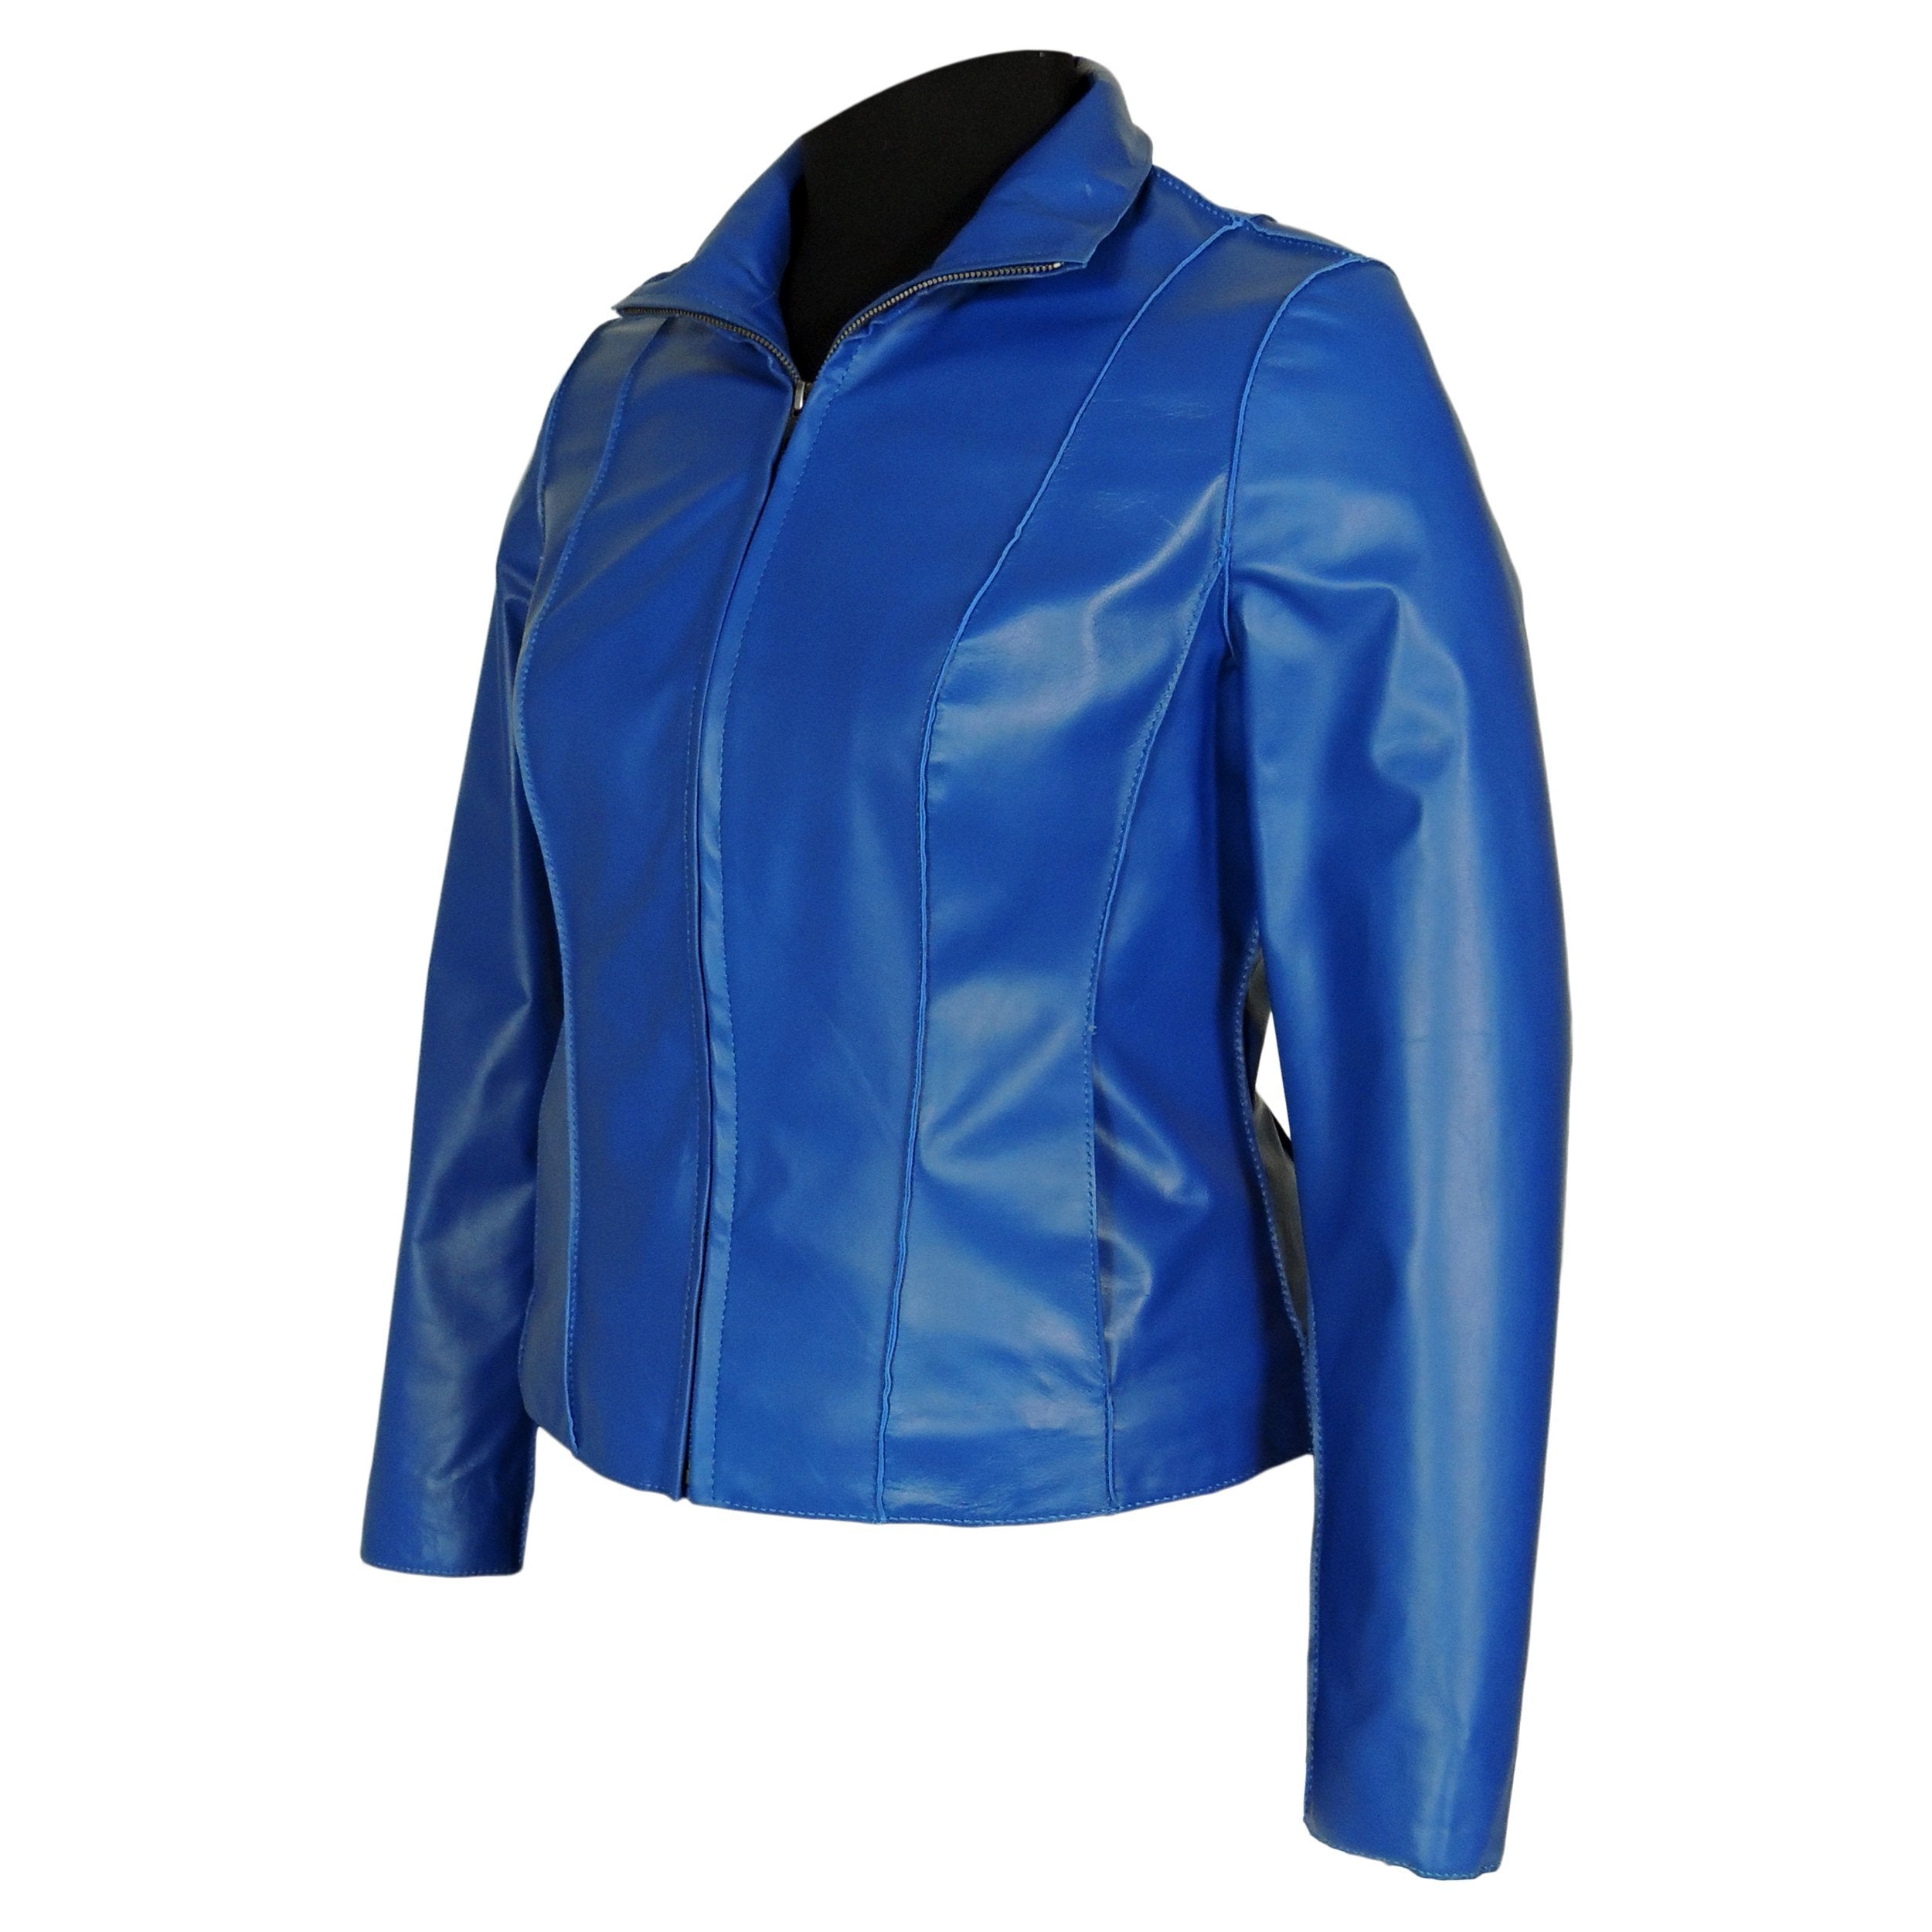 Picture of a Women's Professional Stunner Sheepskin Leather Jacket blue front side view